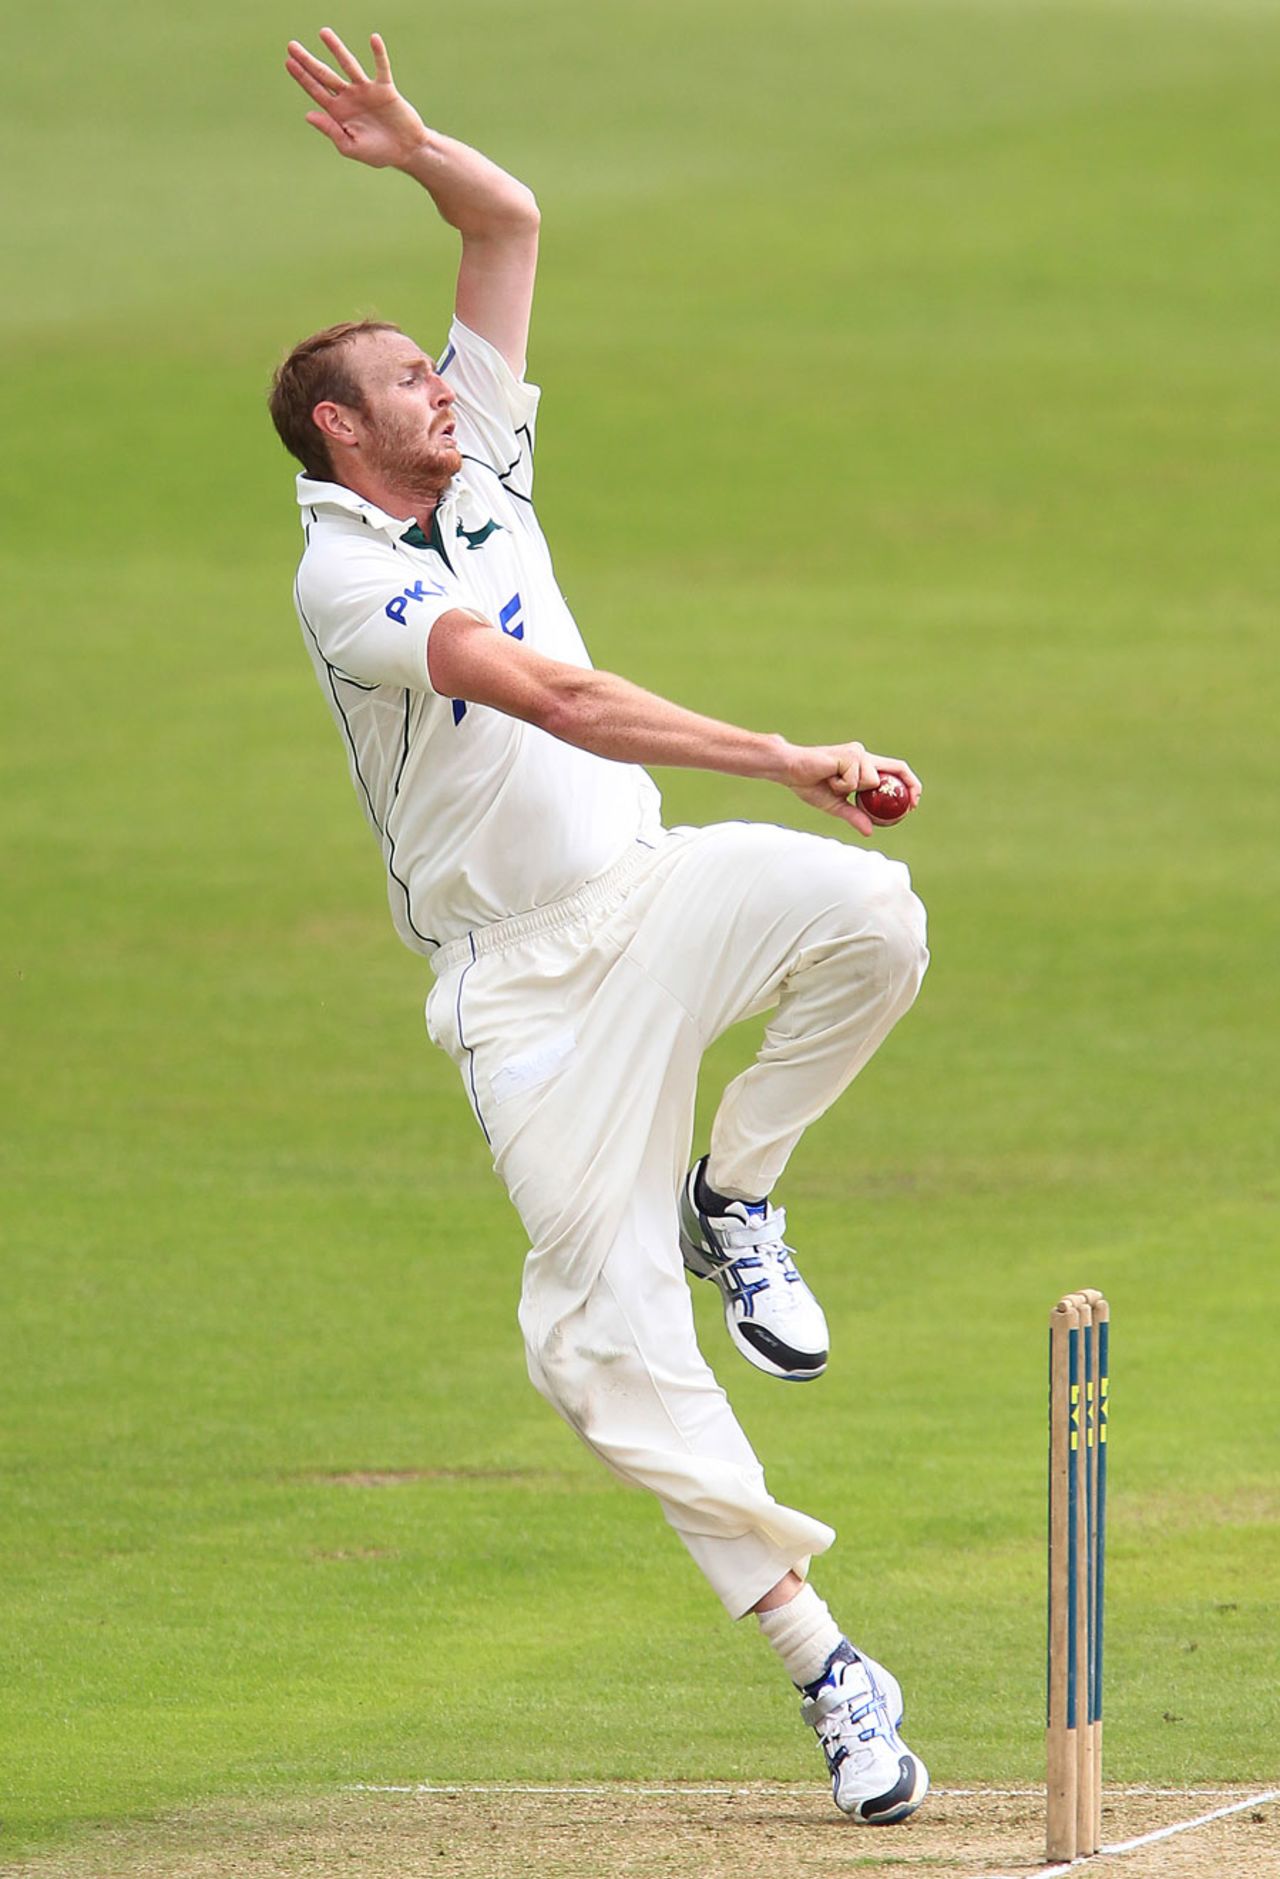 Andy Carter took the early wicket of Paul Horton, Nottinghamshire v Lancashire, County Championship, Trent Bridge, June, 6, 2012